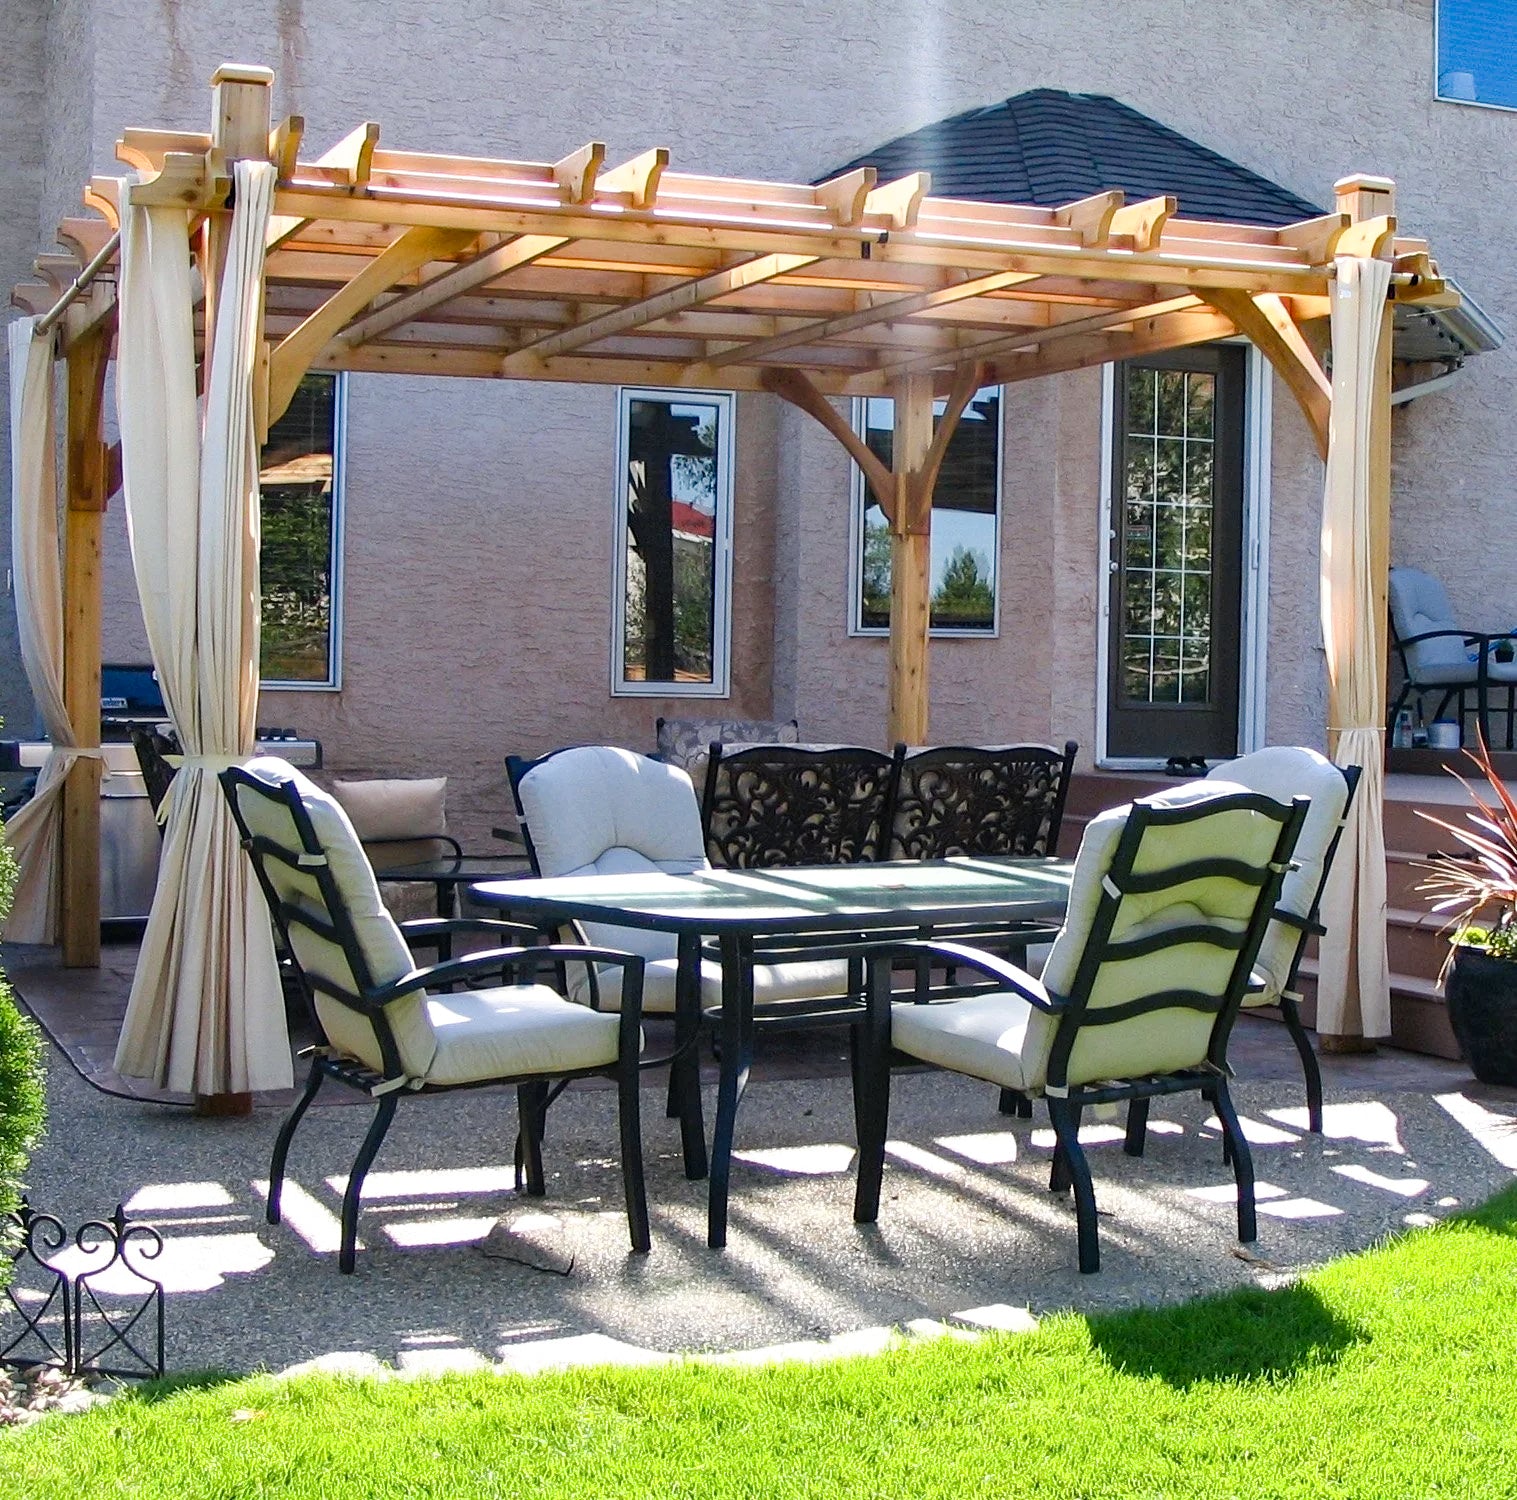 outdoor living today cedar pergola with curtains and outdoor furniture on a pavement